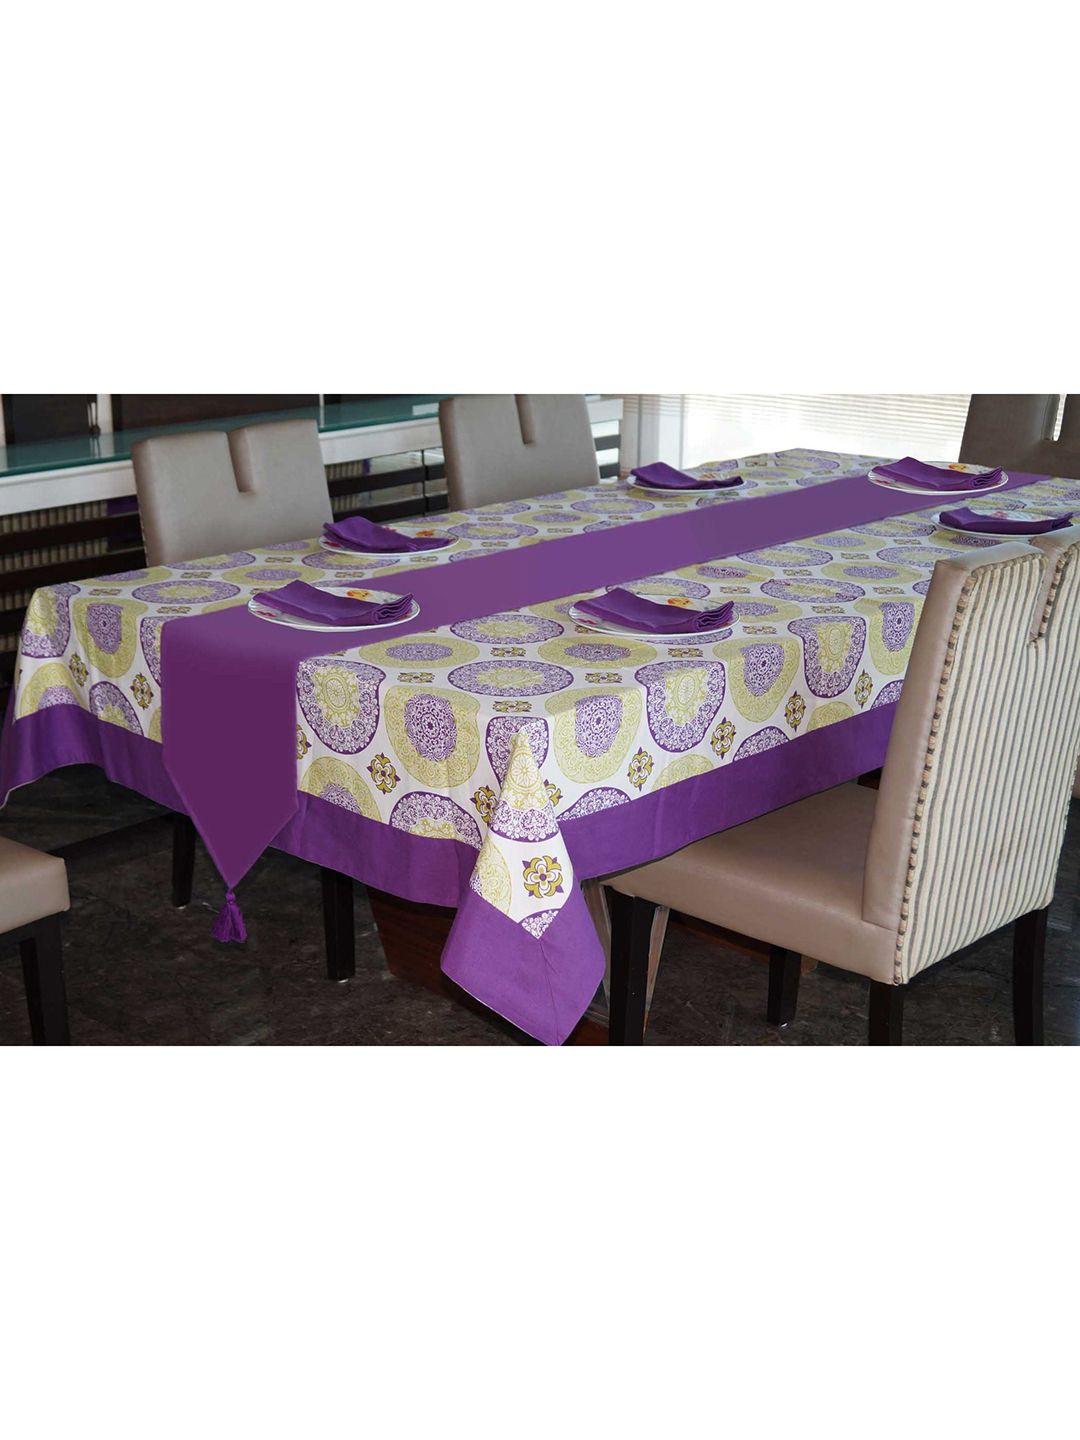 Lushomes Purple Bold Printed 6 Seater Small Cotton Linen Table Cloth Price in India